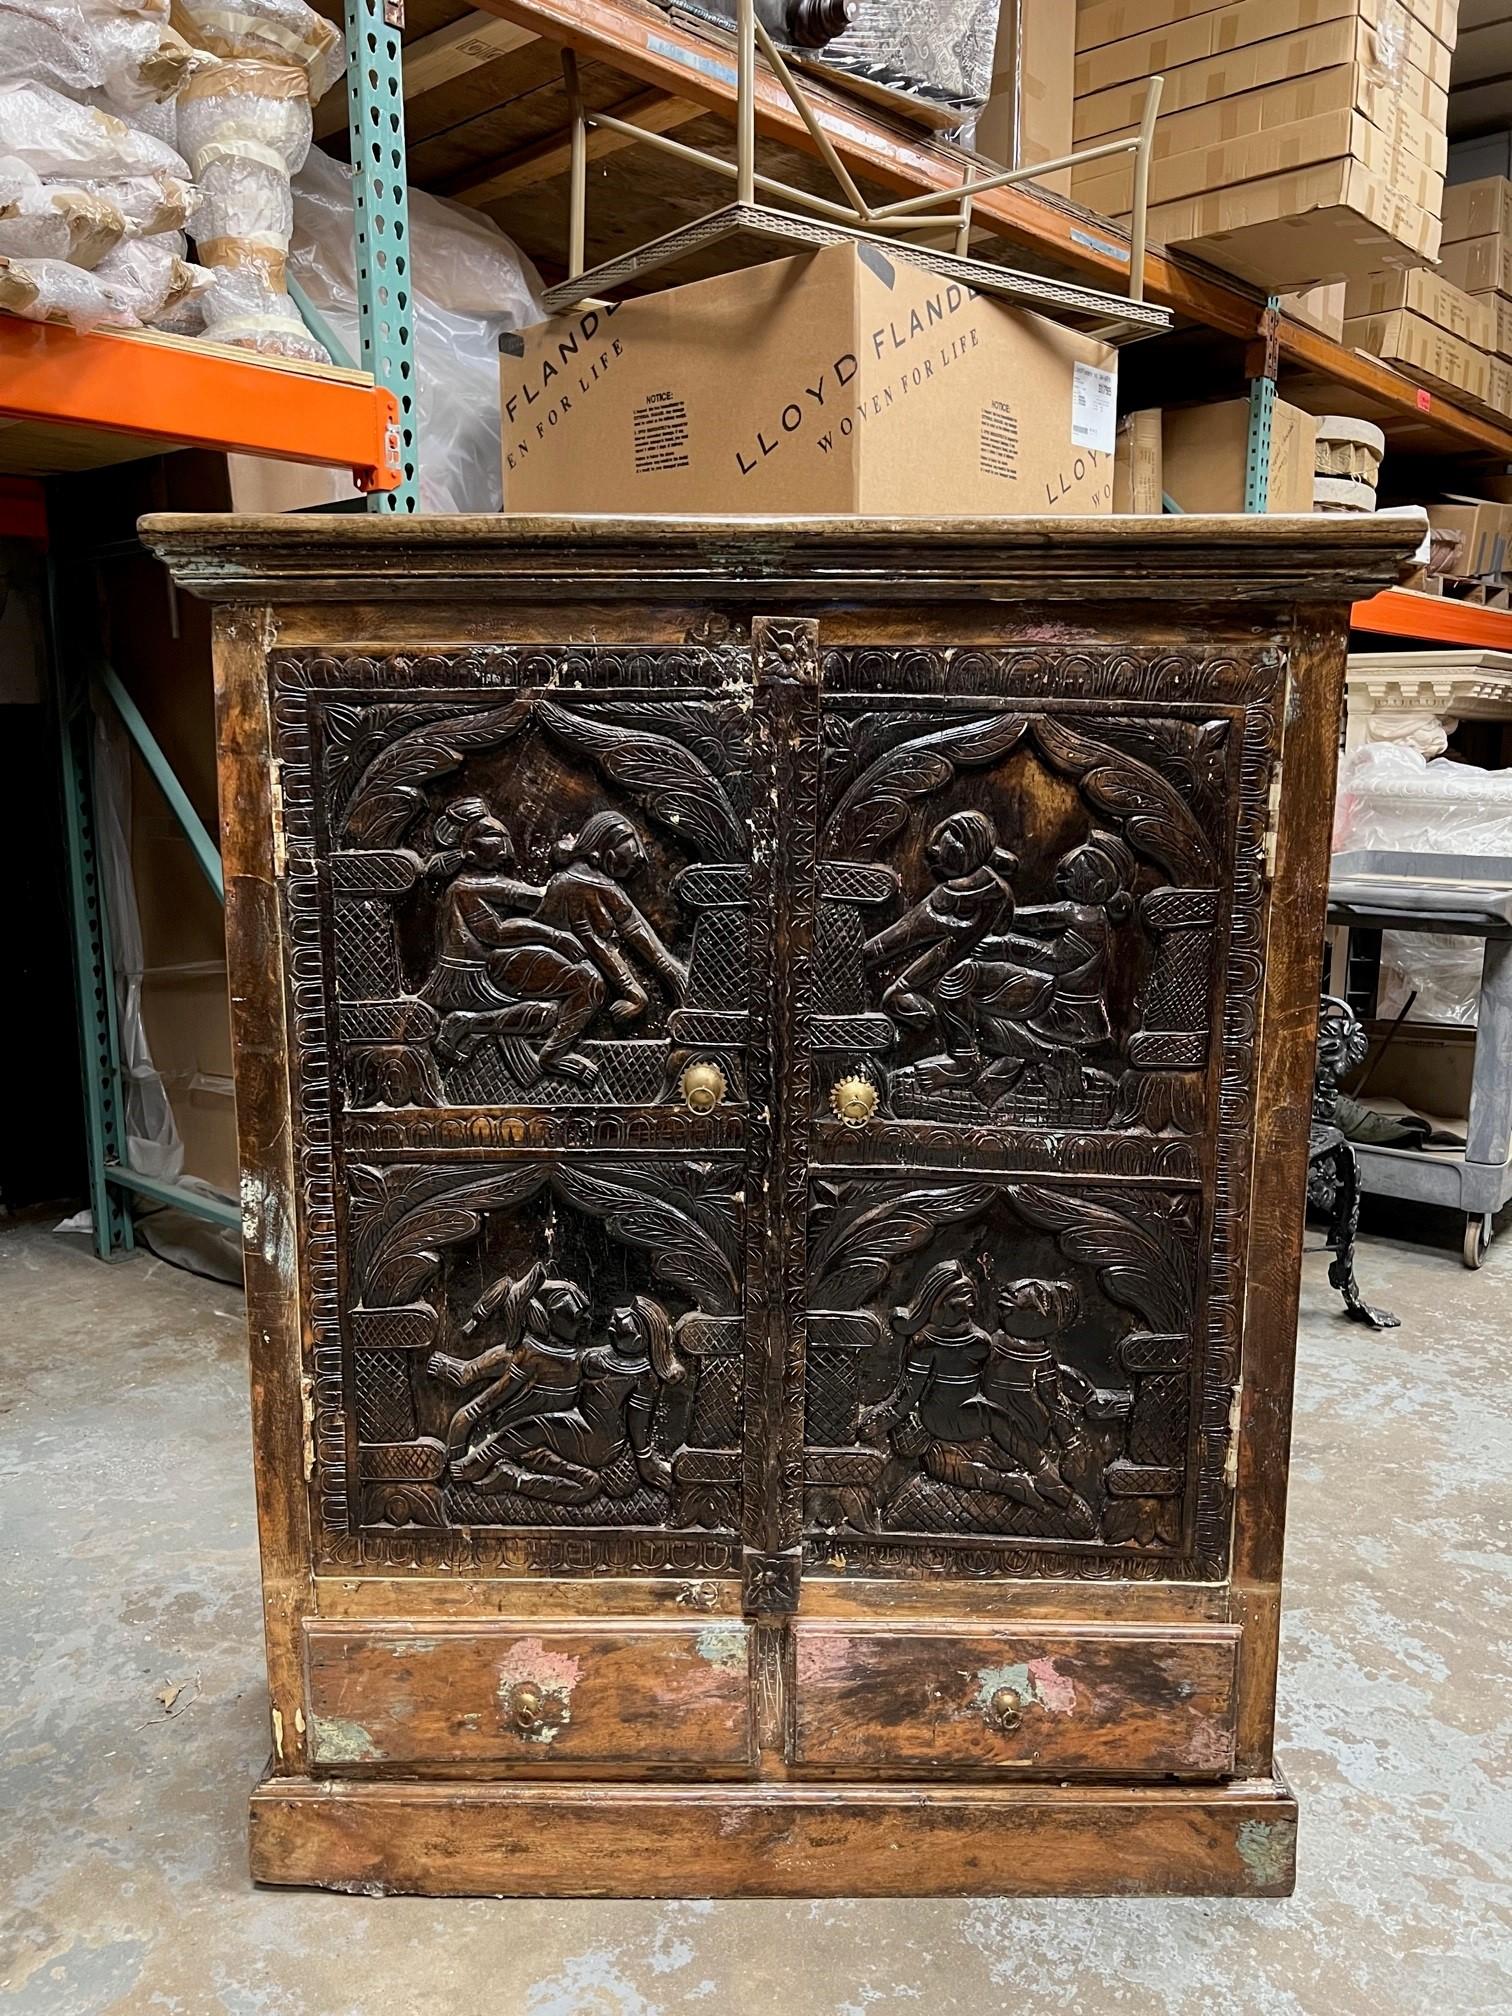 Vintage Erotic two door, two drawer carved wood cabinet imported from India. Each carved wood panel shows a different sex position. I believe the panels are older than the cabinet and the cabinet was built around the doors. It is an unusual piece, I